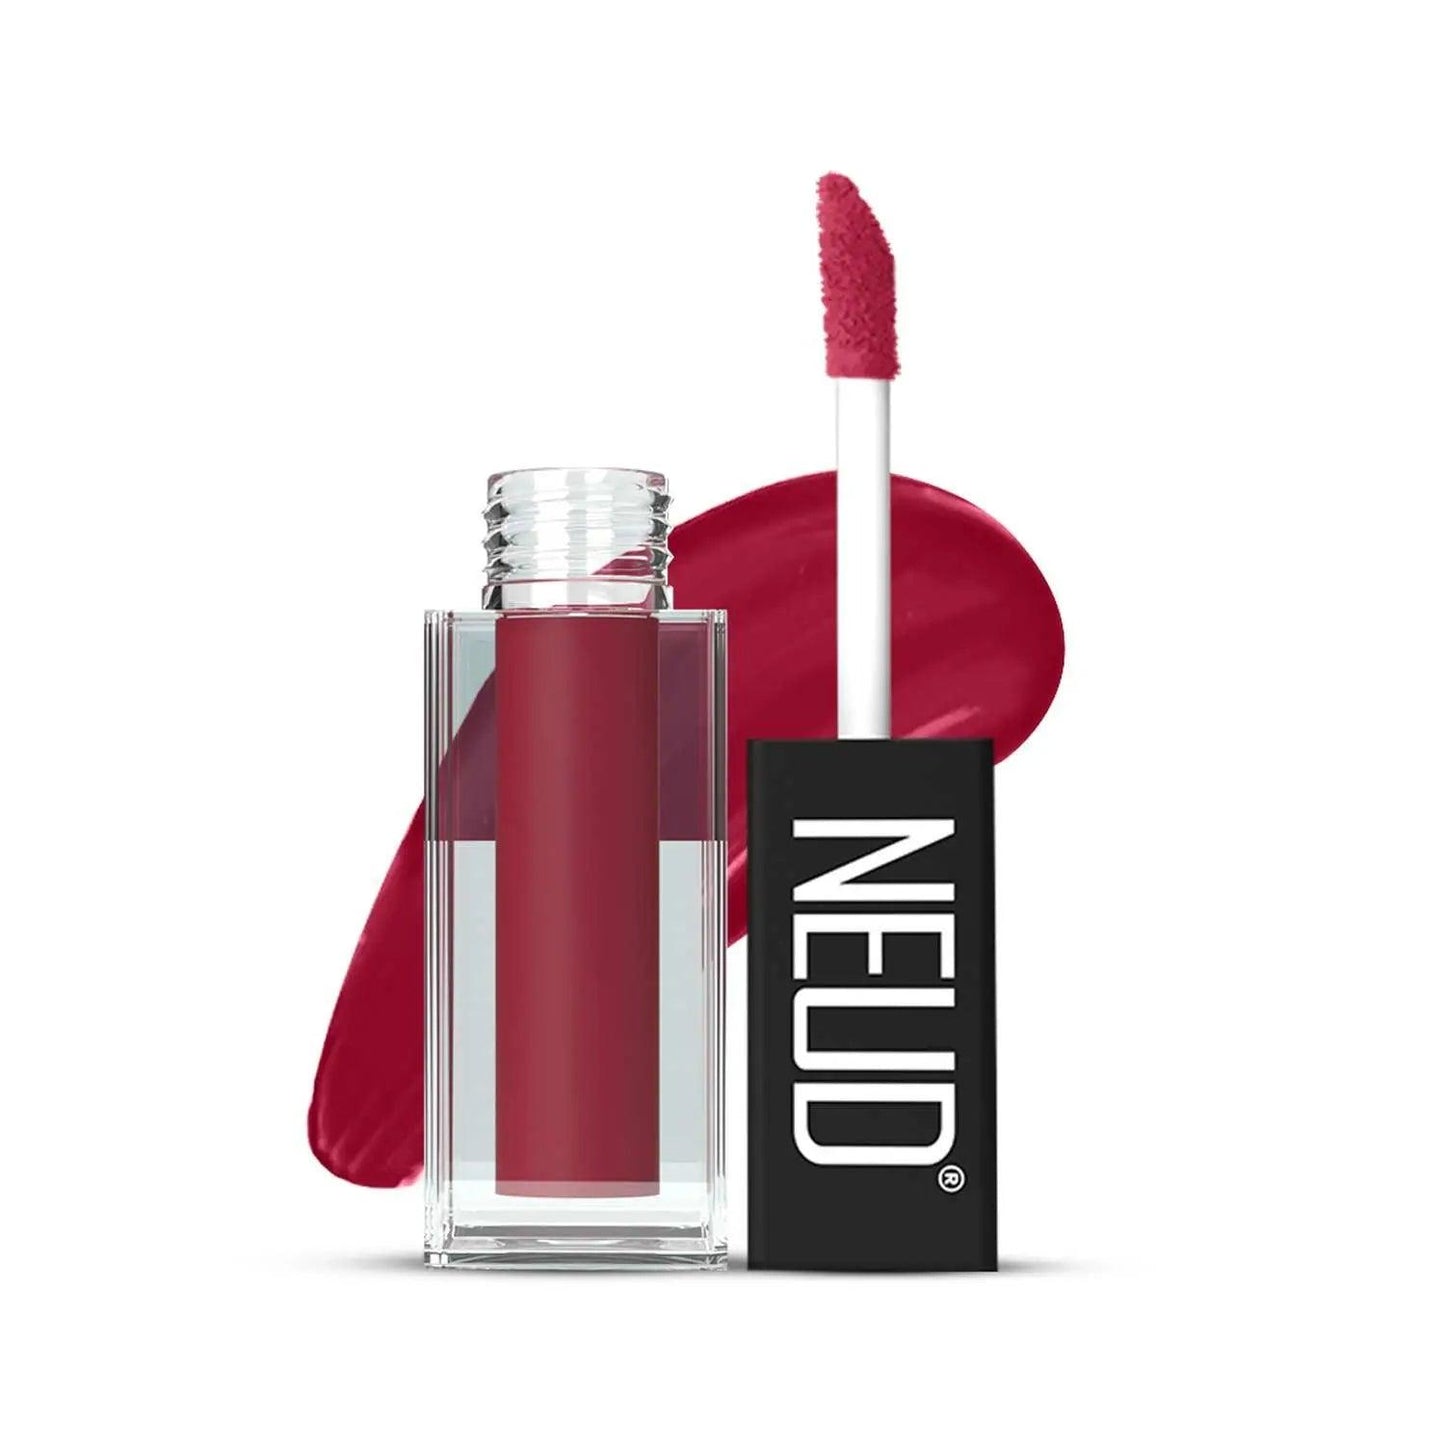 NEUD Matte Liquid Lipstick Peachy Pink with Jojoba Oil, Vitamin E and Almond Oil - Smudge Proof 12-hour Stay Formula with Free Lip Gloss 8906116281130